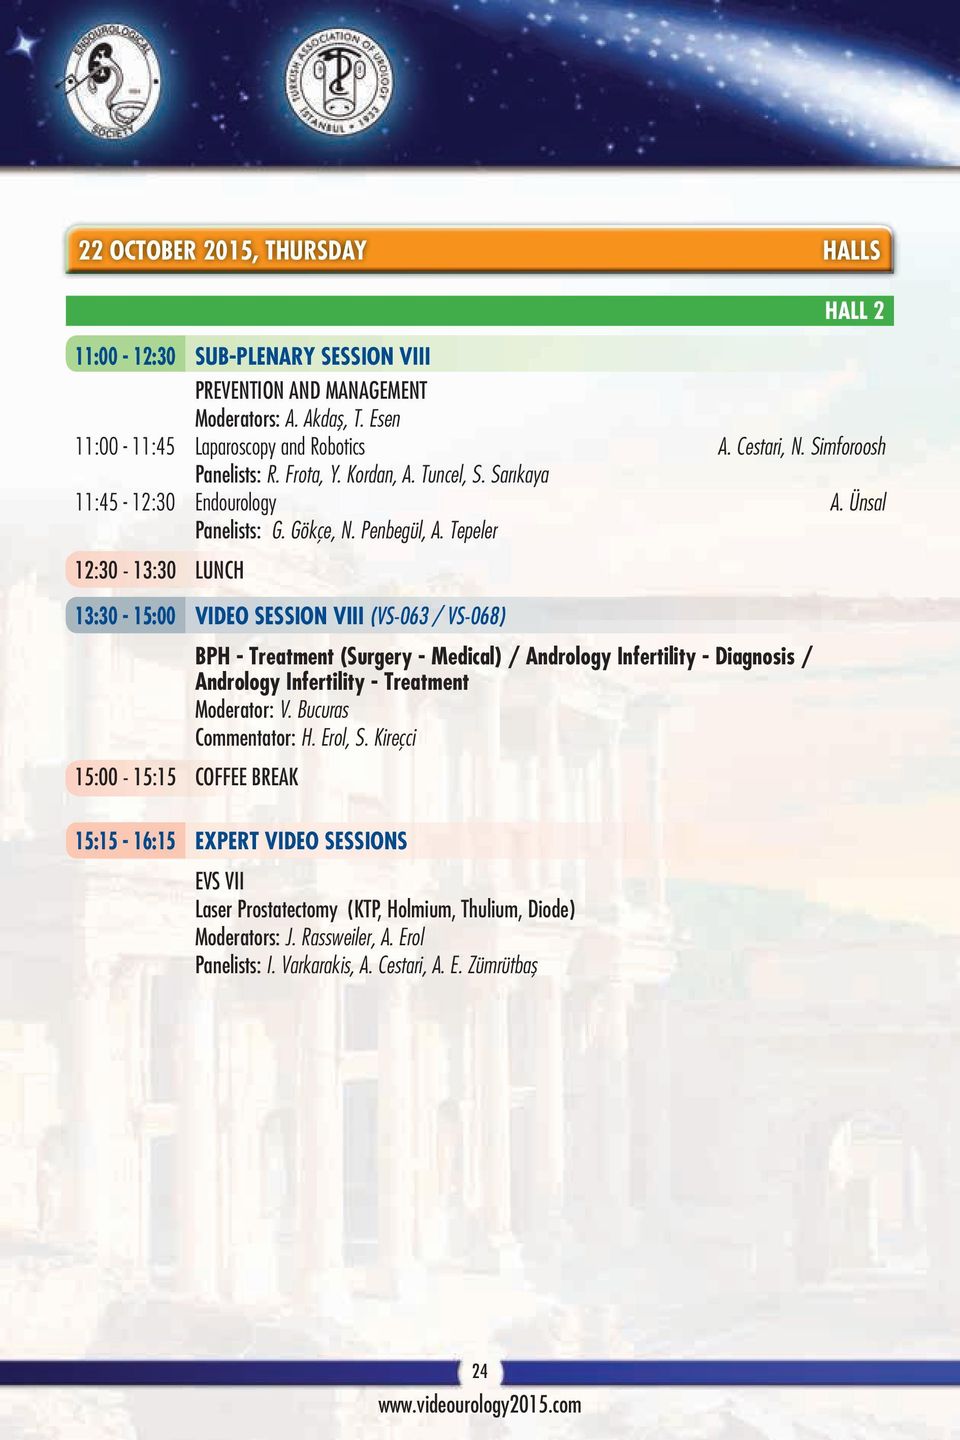 Tepeler 12:30-13:30 LUNCH 13:30-15:00 VIDEO SESSION VIII (VS-063 / VS-068) 15:00-15:15 COFFEE BREAK BPH - Treatment (Surgery - Medical) / Andrology Infertility - Diagnosis / Andrology